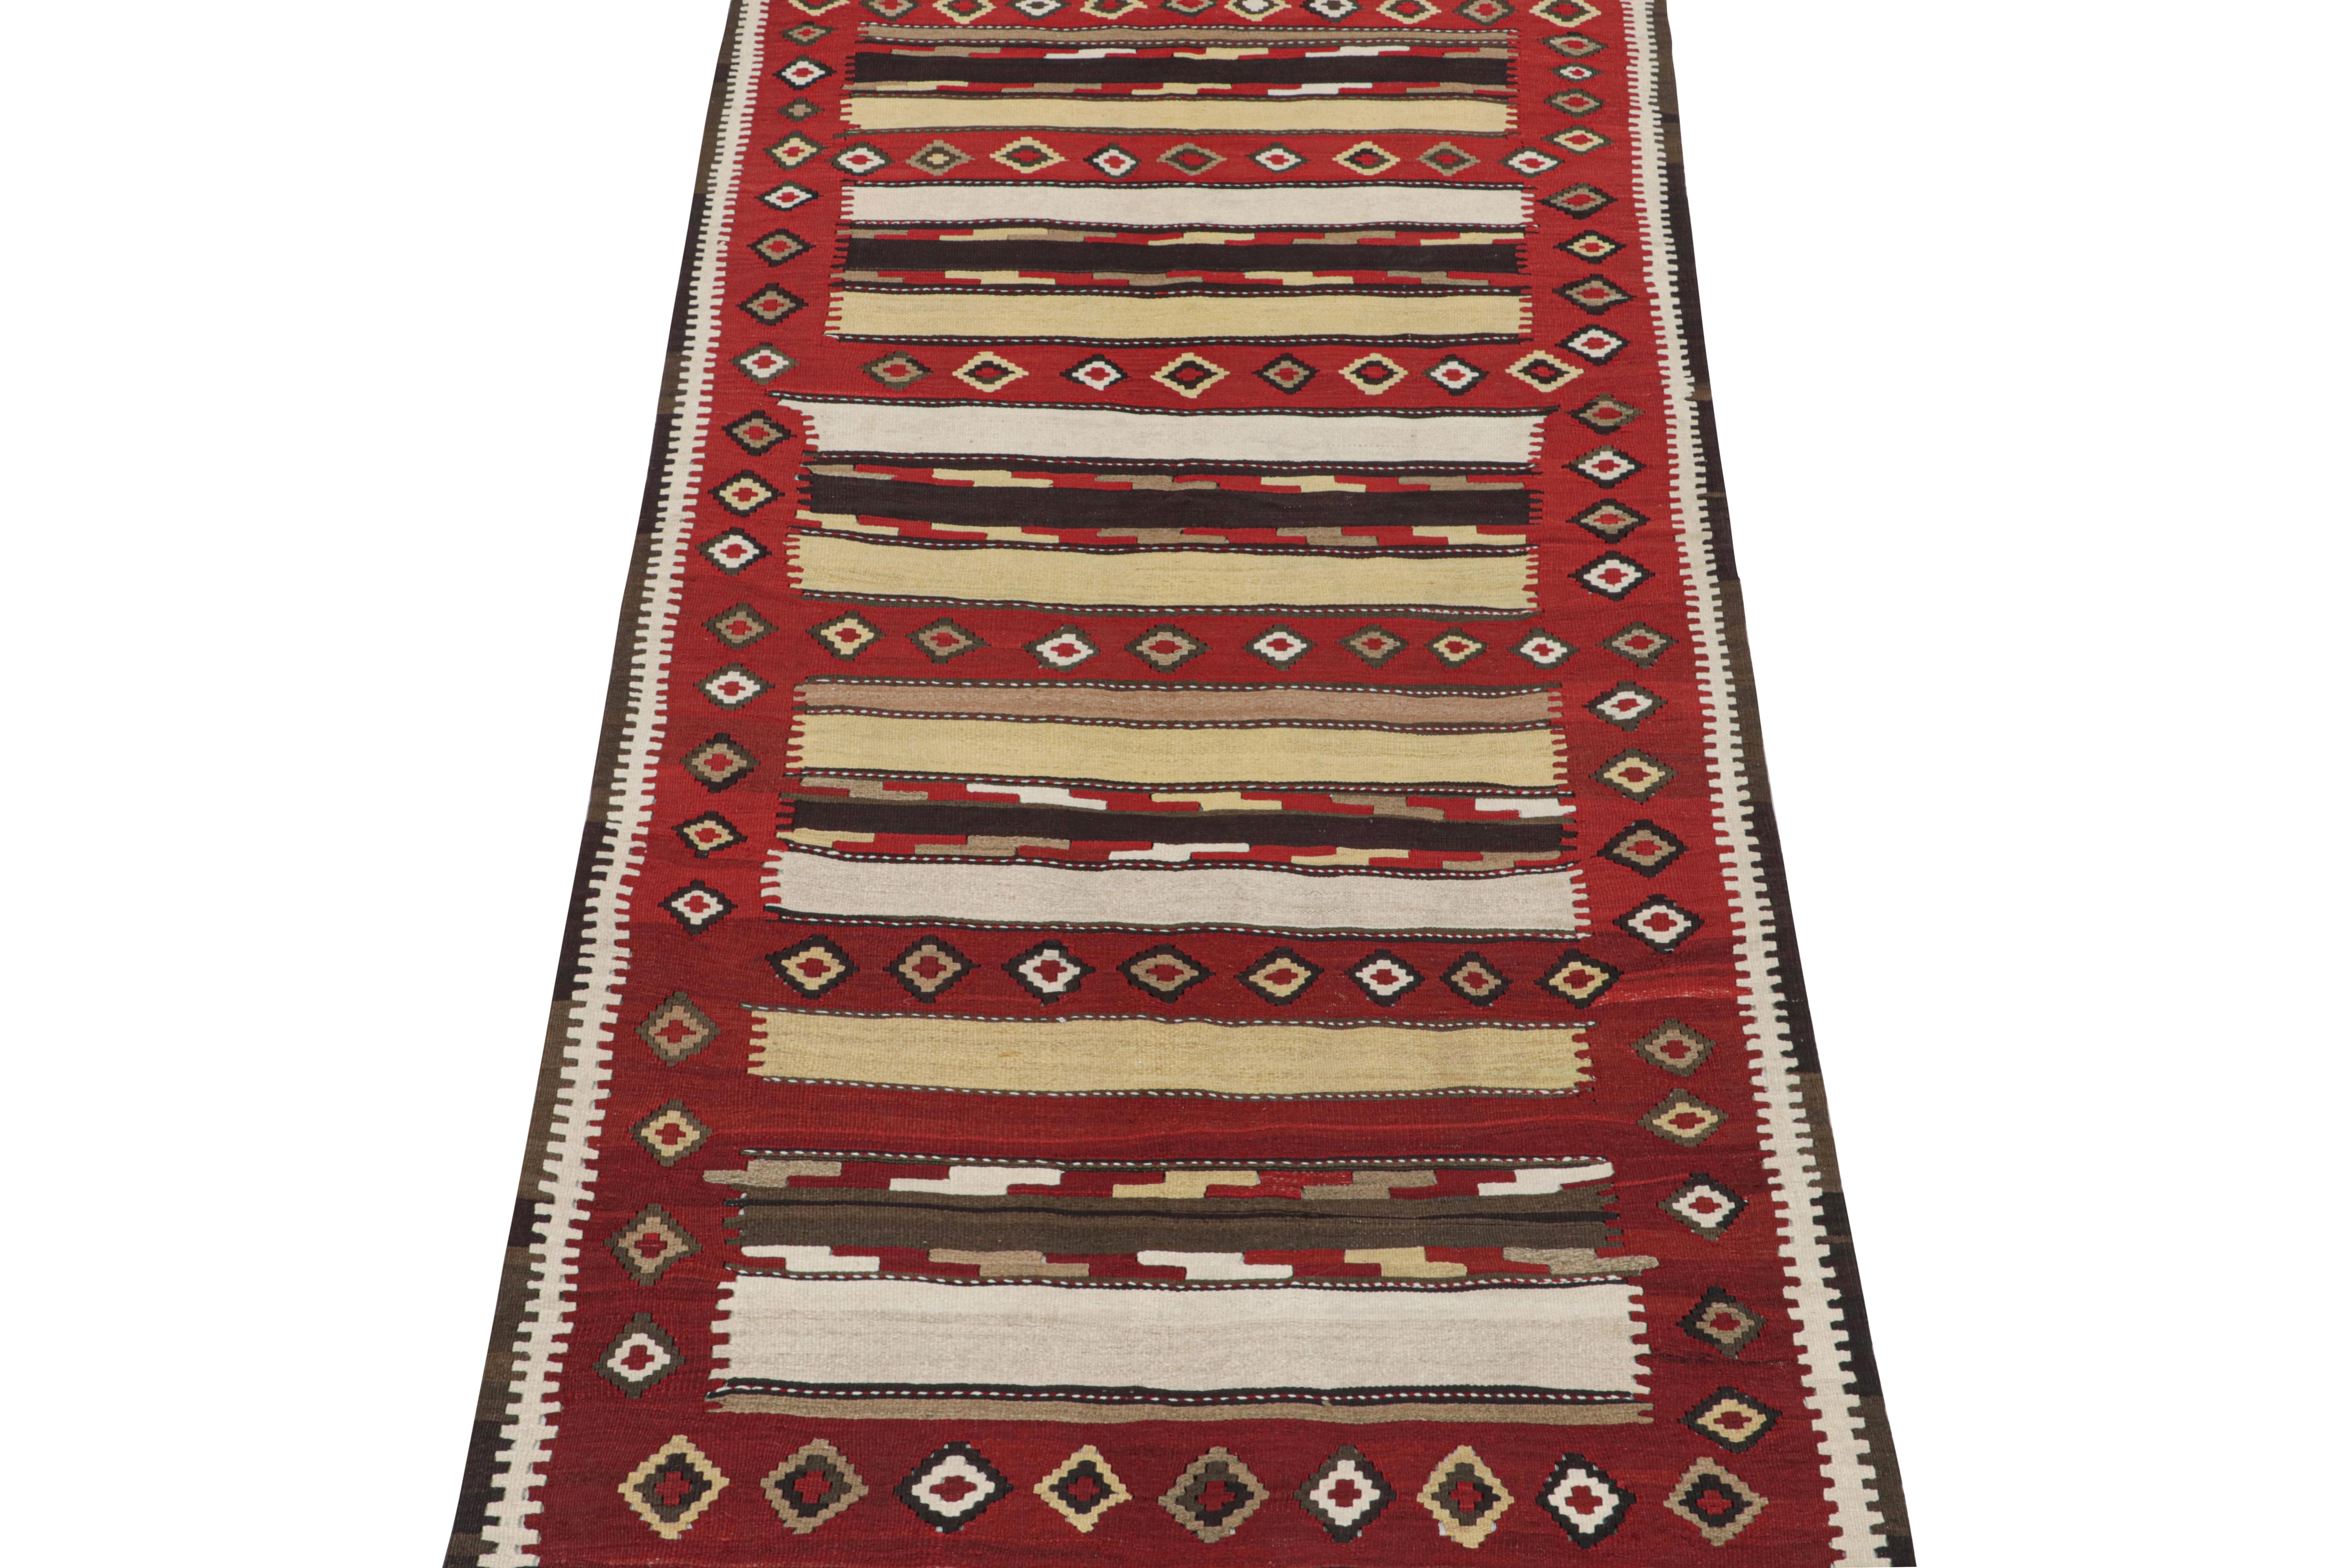 Vintage Shahsavan Persian Kilim in Red, Brown, White & Black In Good Condition For Sale In Long Island City, NY